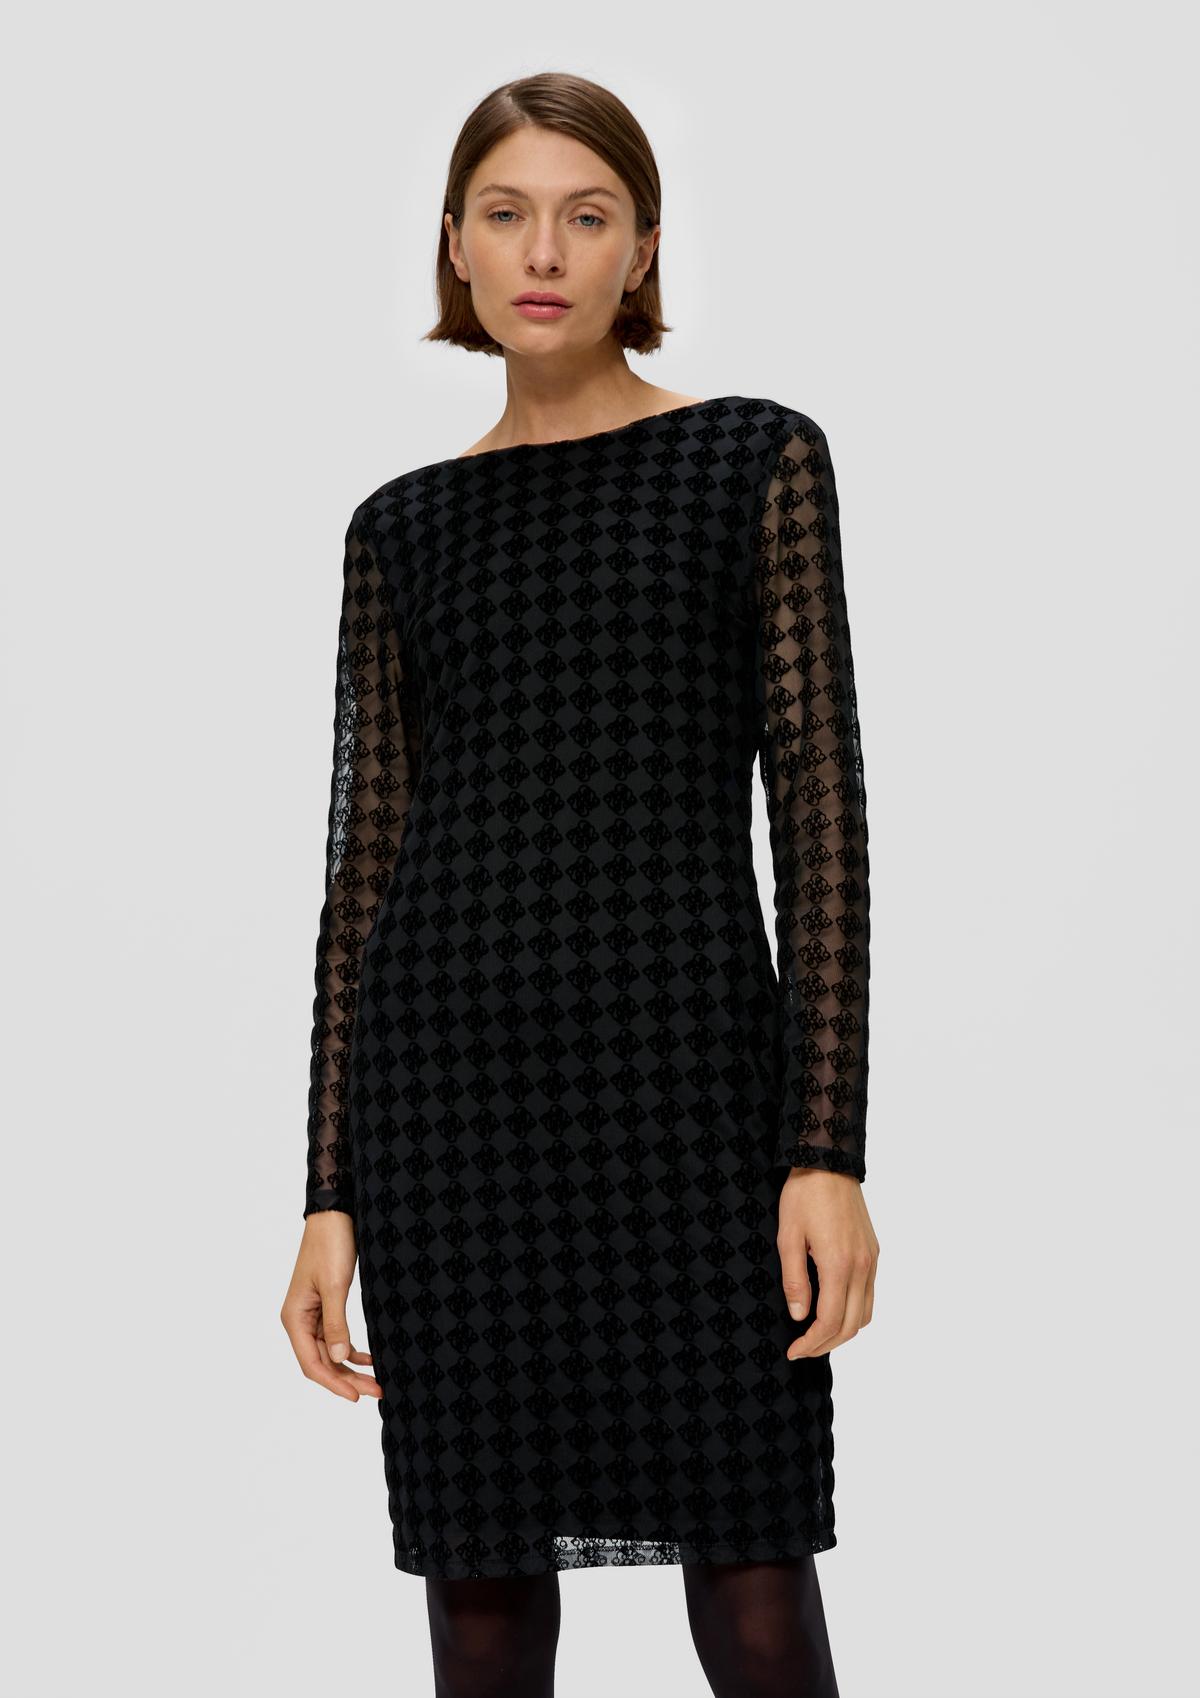 Mesh dress with an all-over flock print - black | s.Oliver